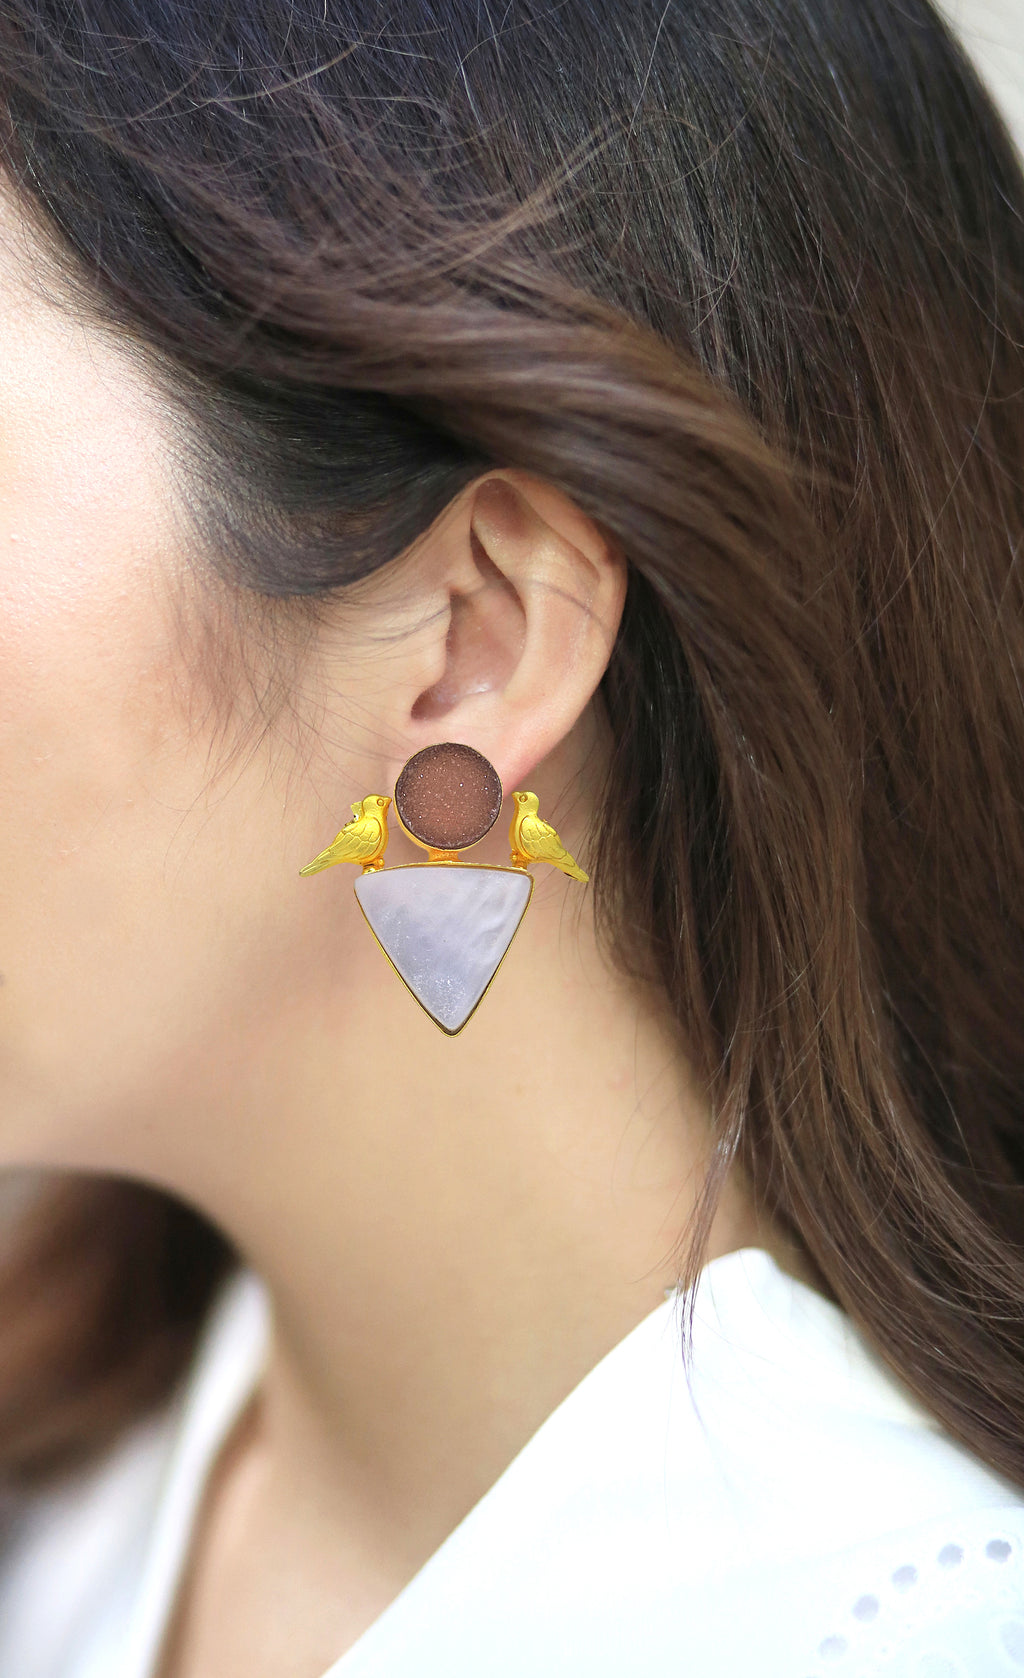 Inverted Triangle Earrings - Statement Earrings - Gold-Plated & Hypoallergenic - Made in India - Dubai Jewellery - Dori